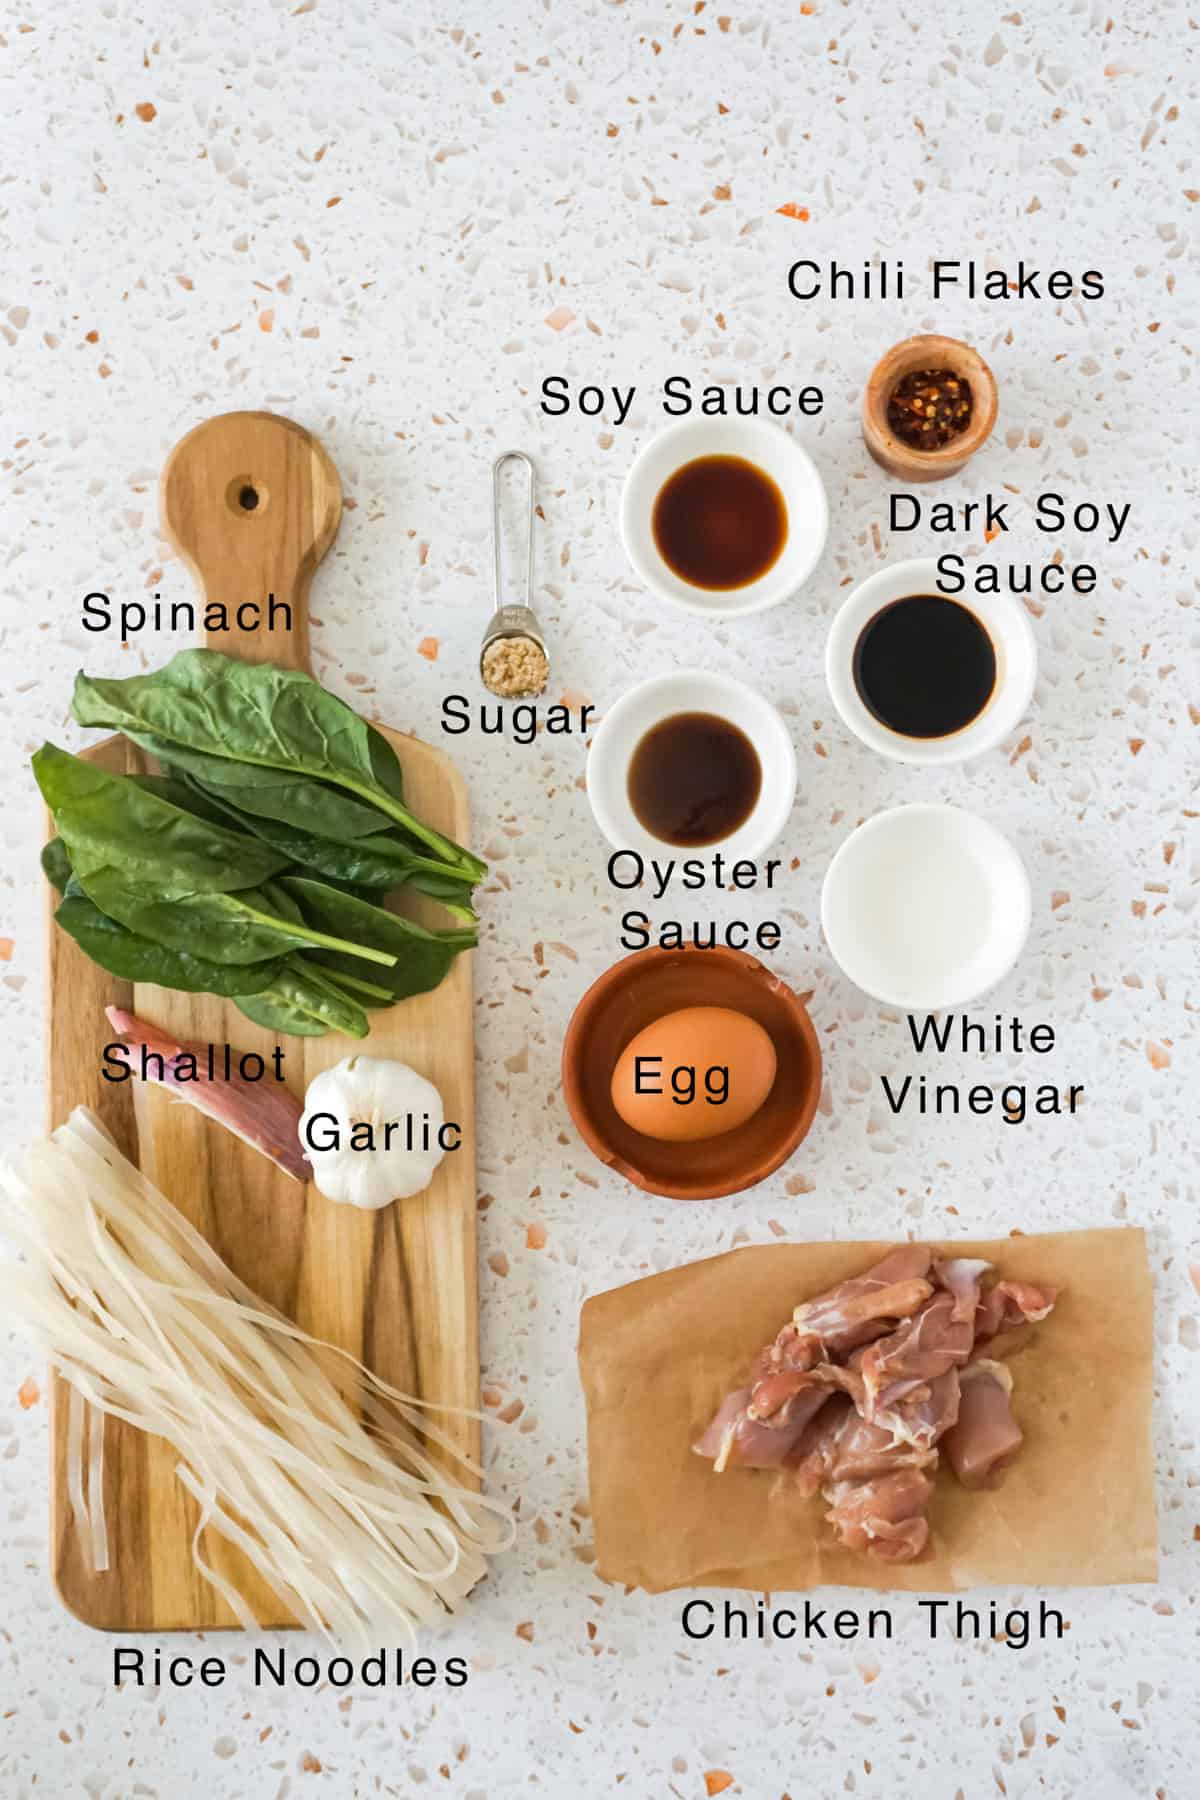 Ingredients for the recipe laid out on the table.